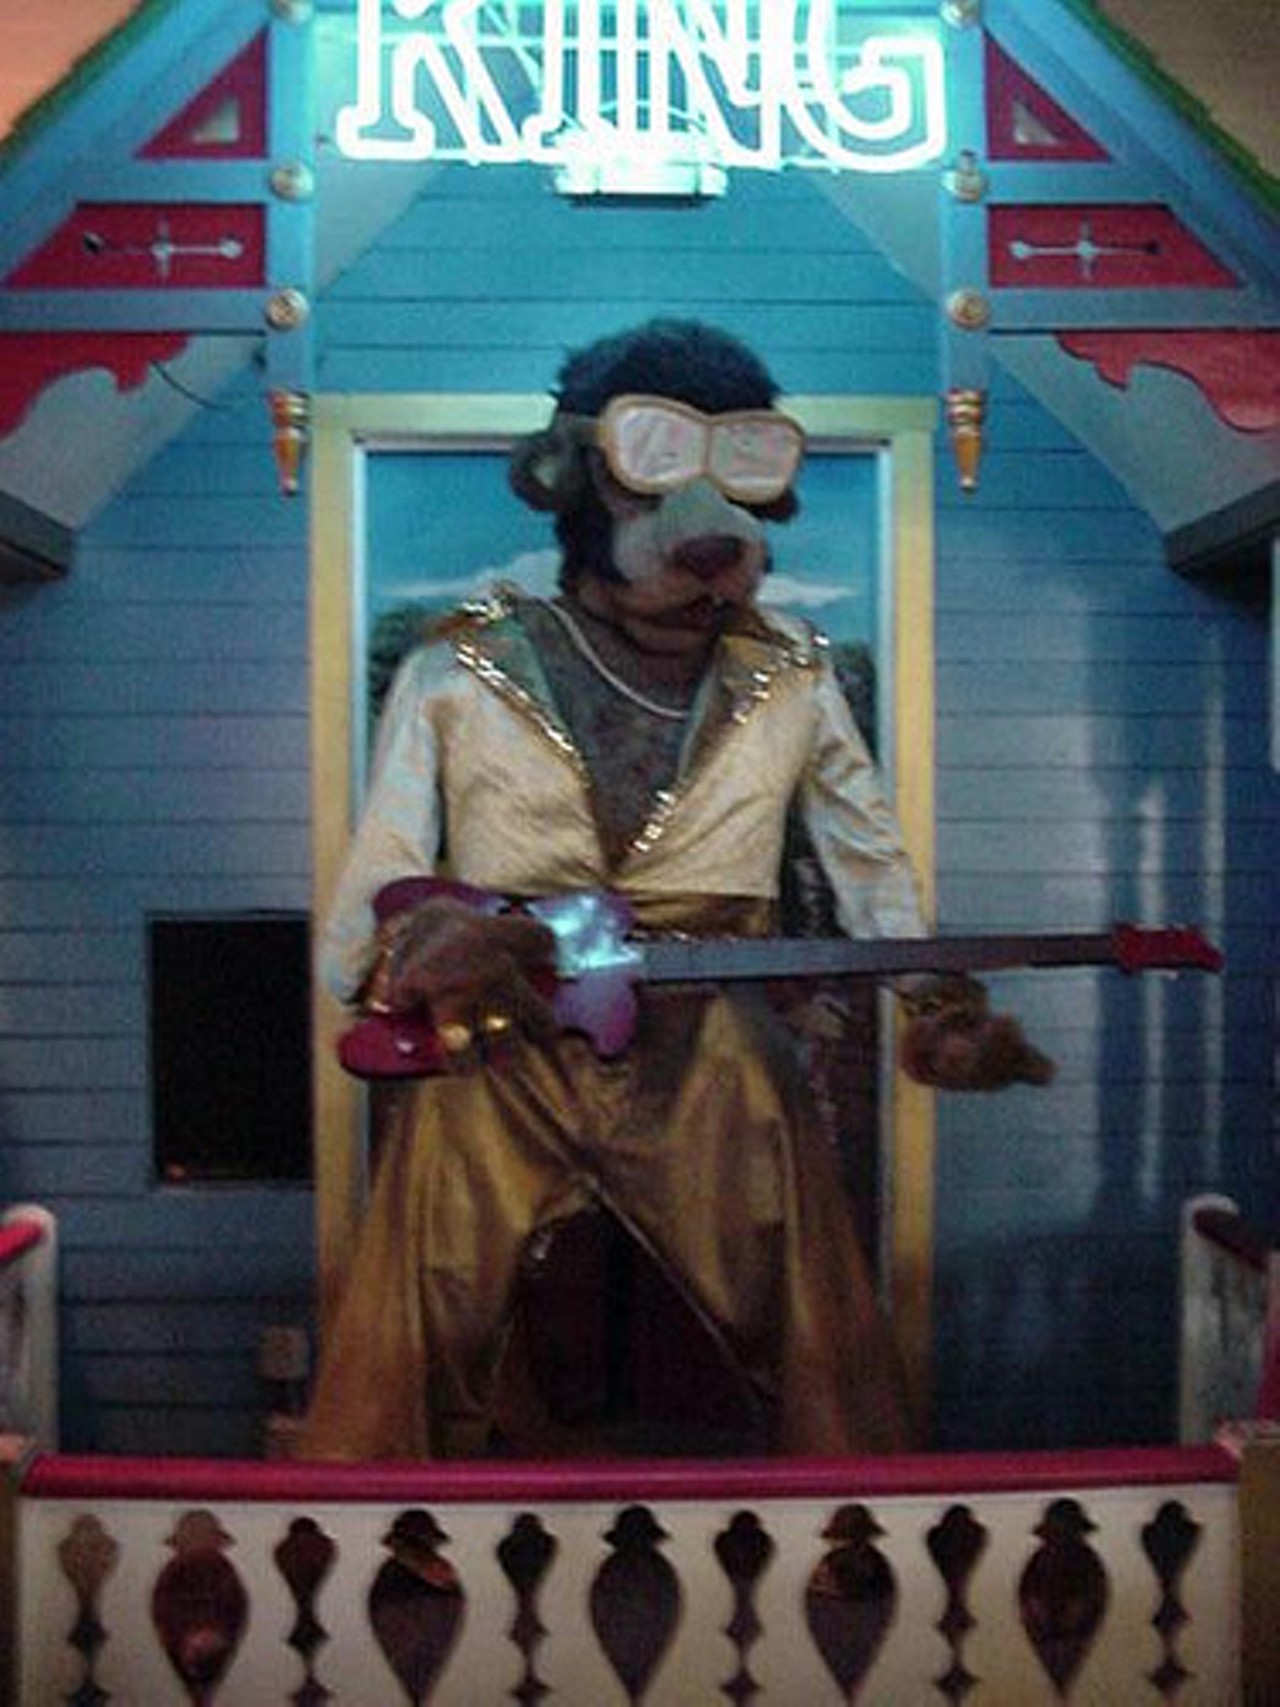 At some point in the attraction's history, it introduced an animatronic act, similar to the ones they had at the old ShowBiz Pizza Theaters. (image via bigfloridacountry.com)